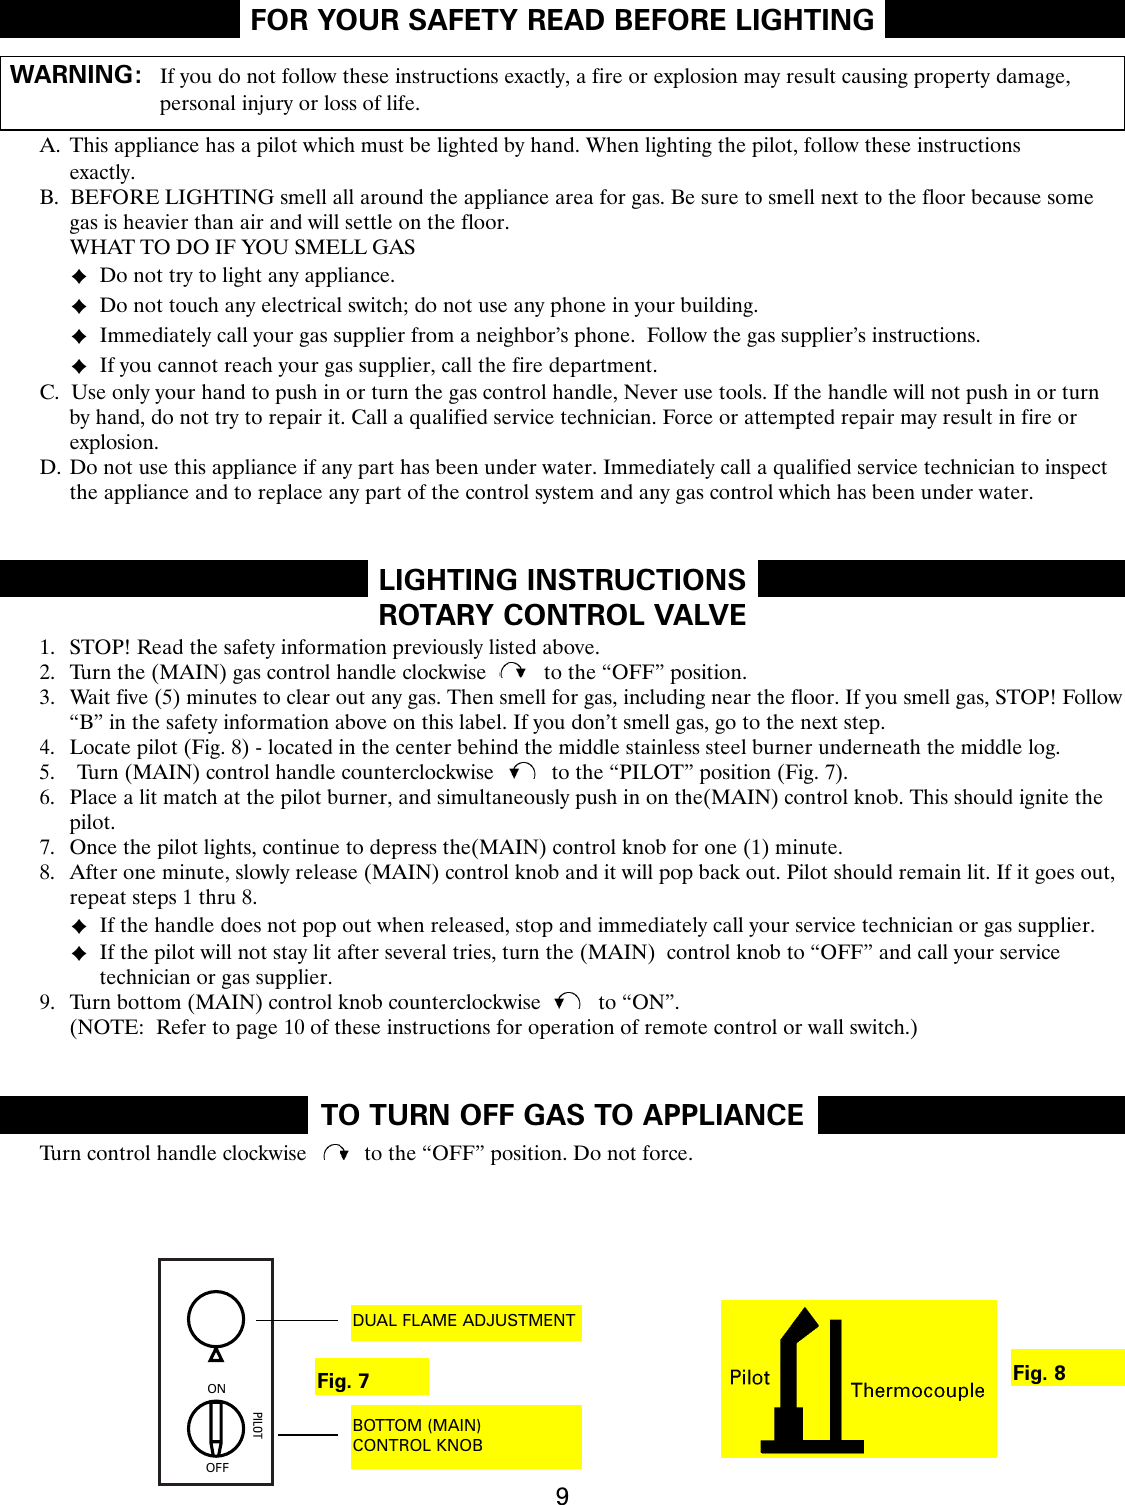 Page 9 of 11 - Heatmaster Heatmaster-Gas-Burner-Users-Manual- Hm142000  Heatmaster-gas-burner-users-manual